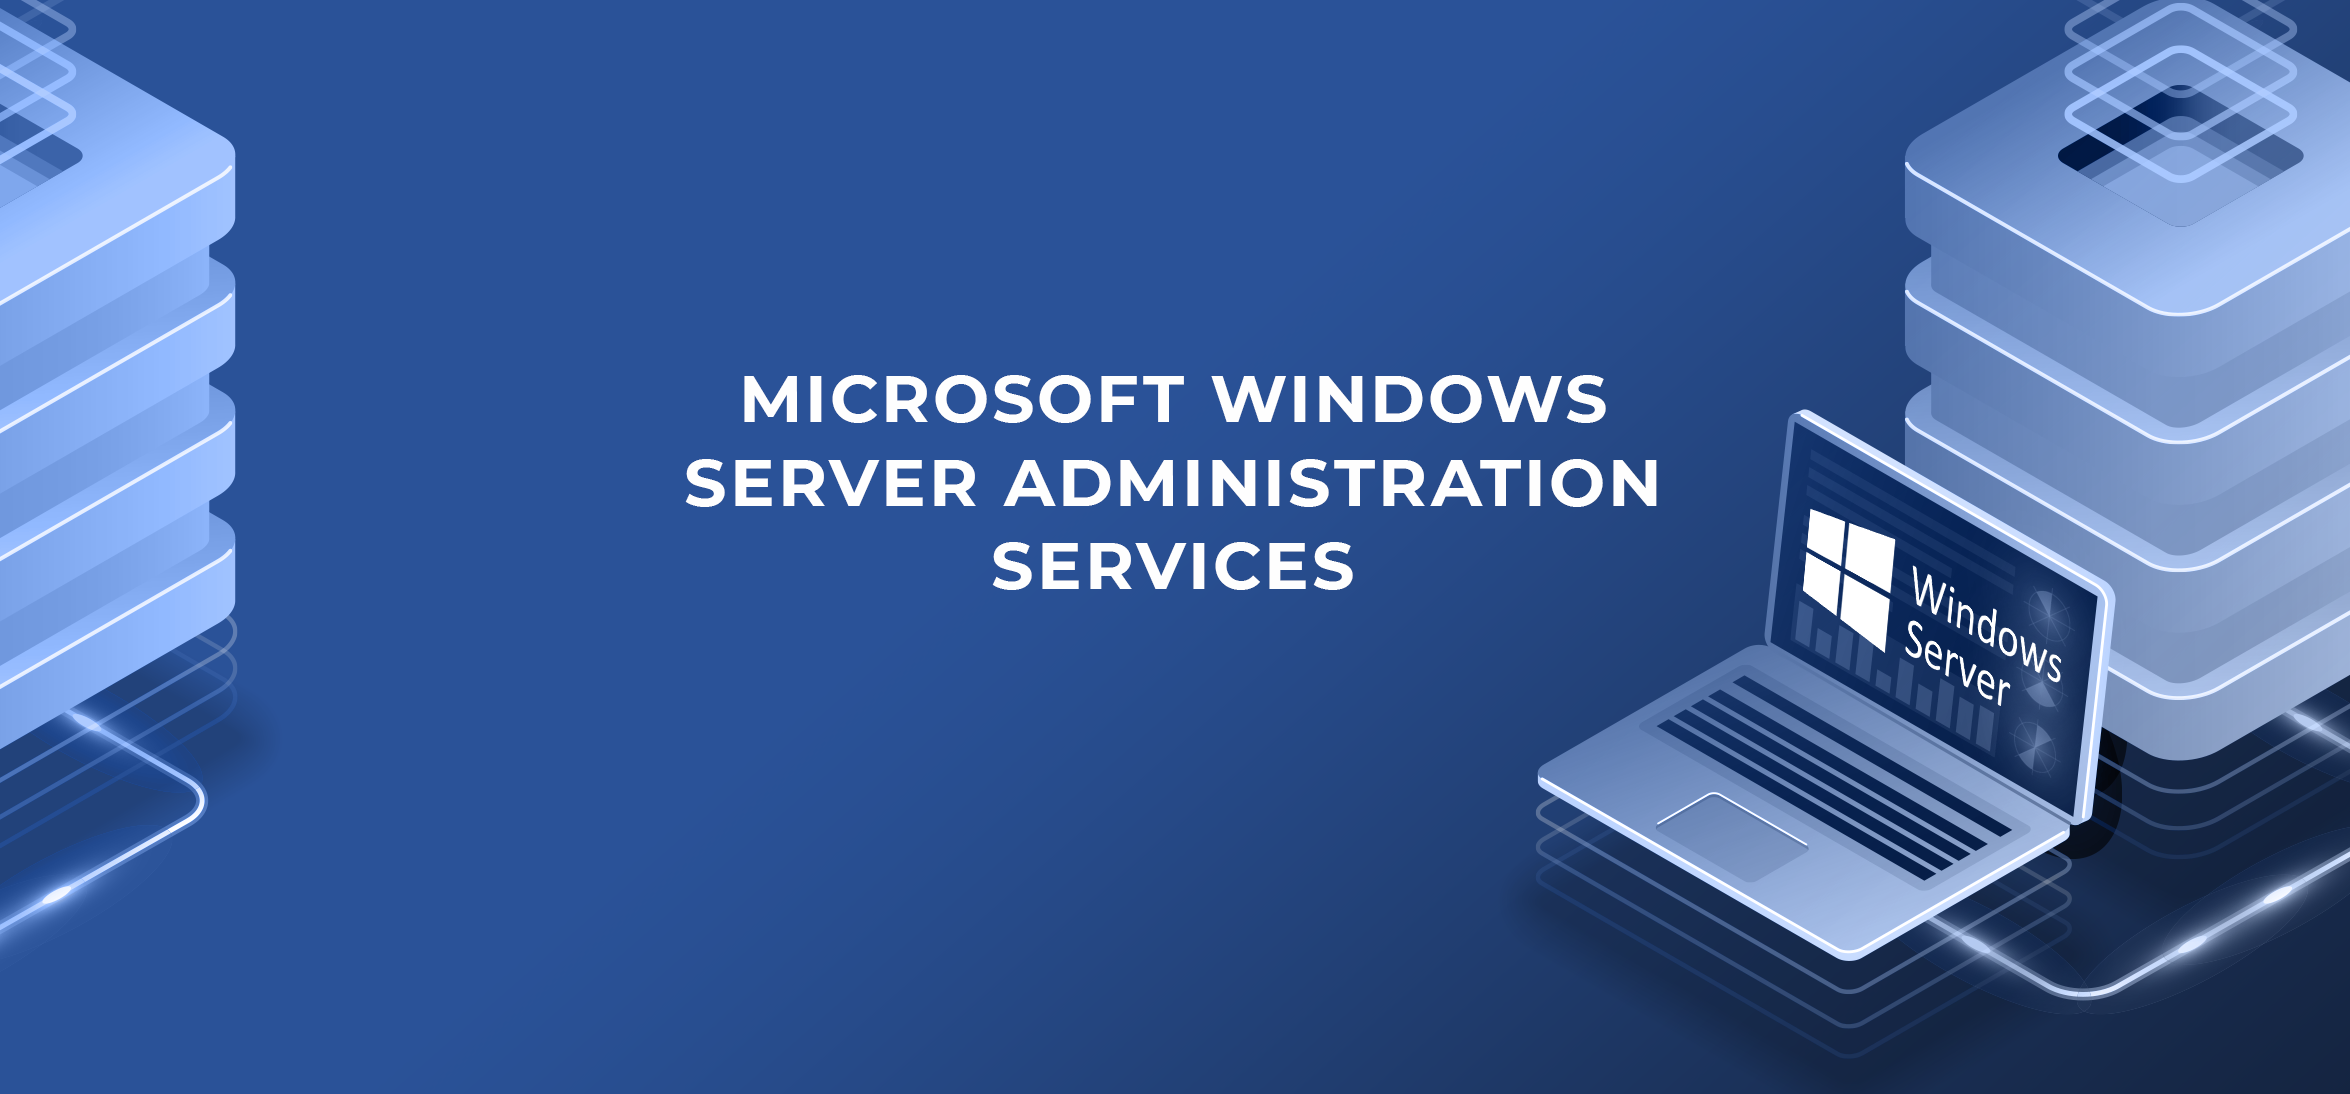 Effective Windows Server Administration and Support Solution Provider in Encinitas CA, 92024